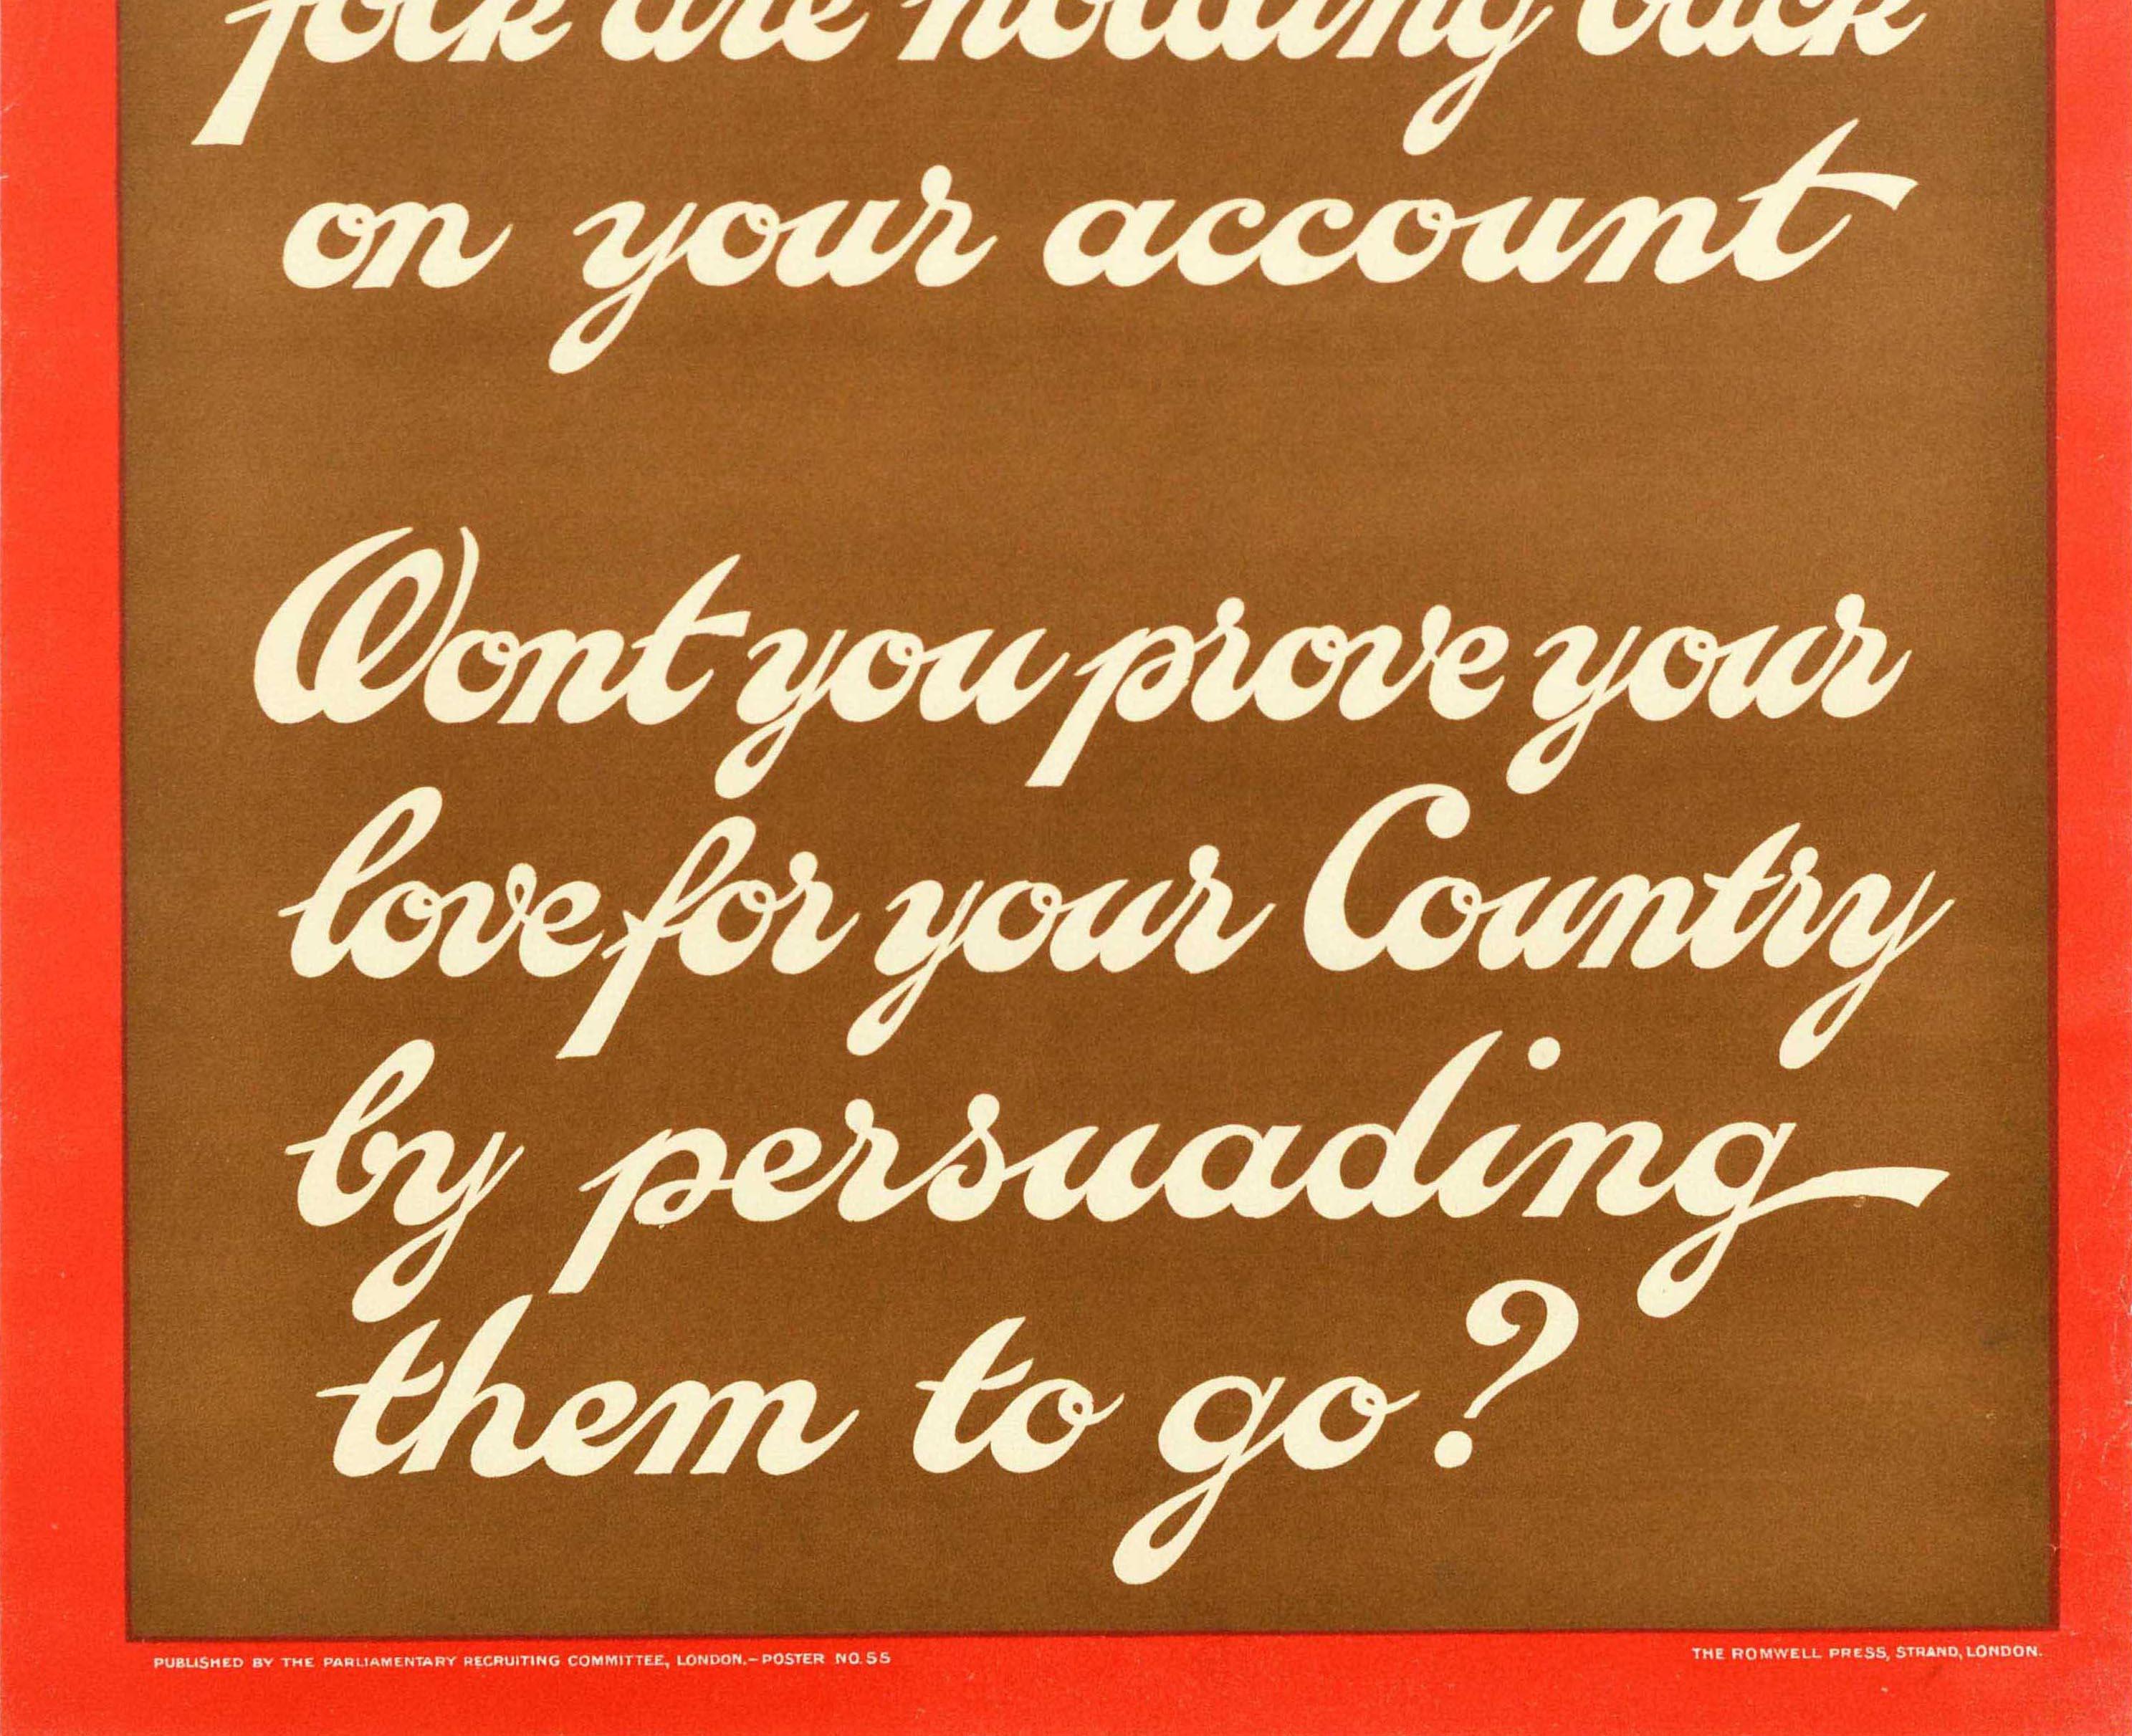 Original antique World War One recruitment poster featuring the bold stylised text within a red border reading - To the Women of Britain Some of your men folk are holding back on your account Won't you prove your love for your Country by persuading